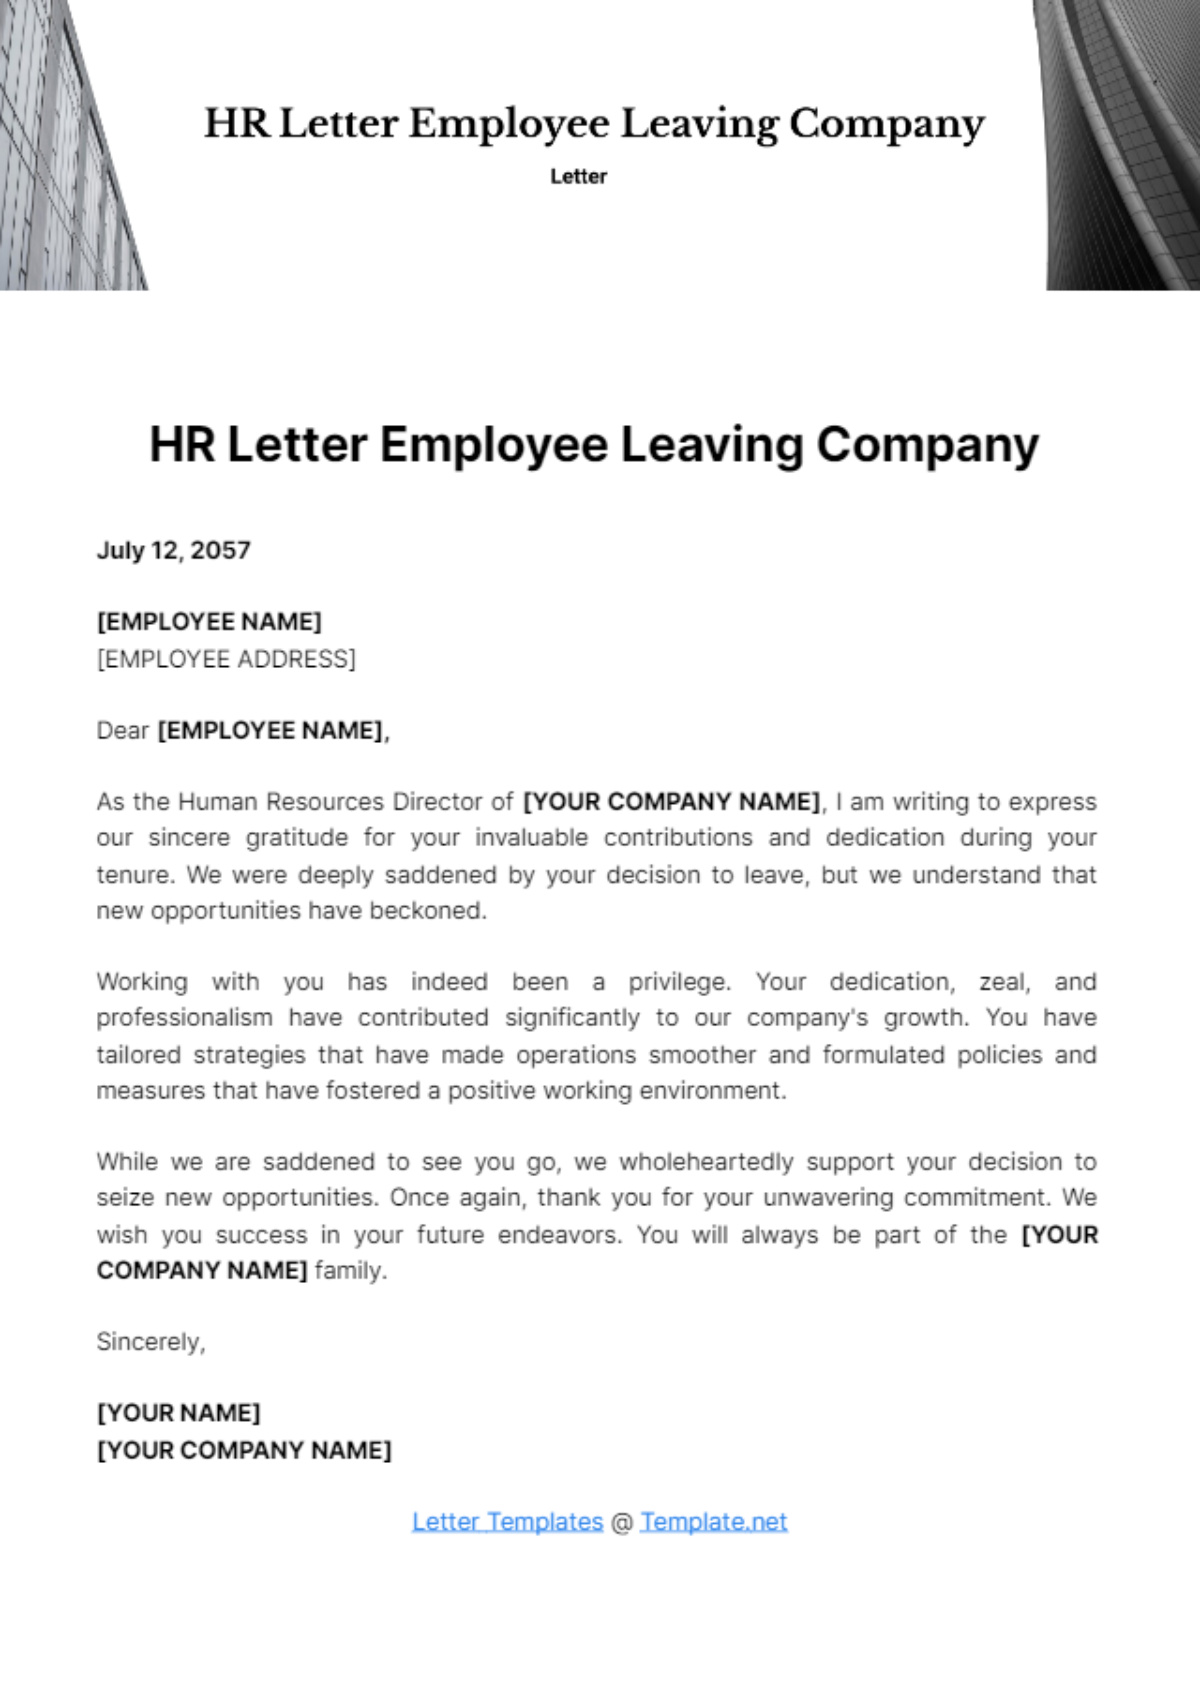 Free HR Letter Employee Leaving Company Template